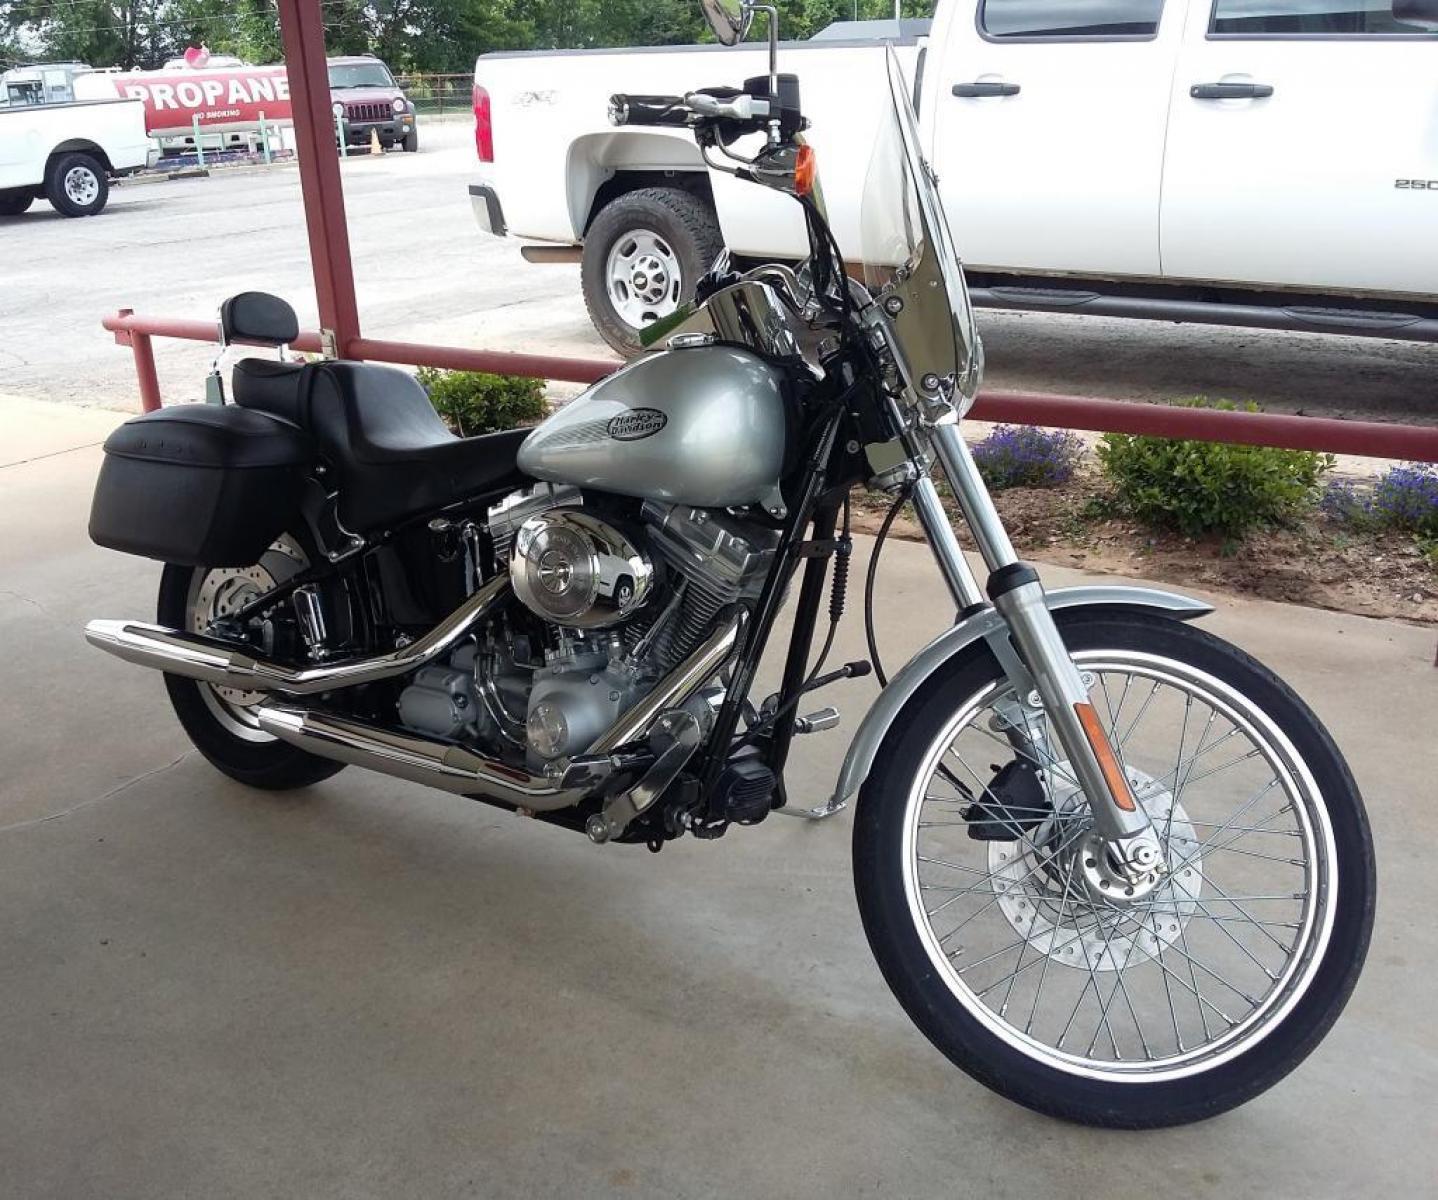 2004 Silver Harley-Davidson FXSTI - (1HD1BVB164Y) with an 1450CC engine, Standard transmission, located at 17760 HWY 62, MORRIS, 74445, 35.609104, -95.877060 - 2004 HARLEY-DAVIDSON FXSTI SOFTAIL STANDARD 1450CC FEATURES HARLEY SADDLEBAGS, AN ACCESSORY BAG ON THE TANK, SILVER POWDER-COATED ENGINE AND COVERS, HARDTAIL STYLING WITH HIDDEN HORIZONTAL REAR SHOCKS, BLACK HORSESHOE OIL TANK, BOBTAIL FENDER, RAKED FRONT FORKS. ALWAYS GARAGE KEPT!! IT'S IN EXCELLE - Photo #7